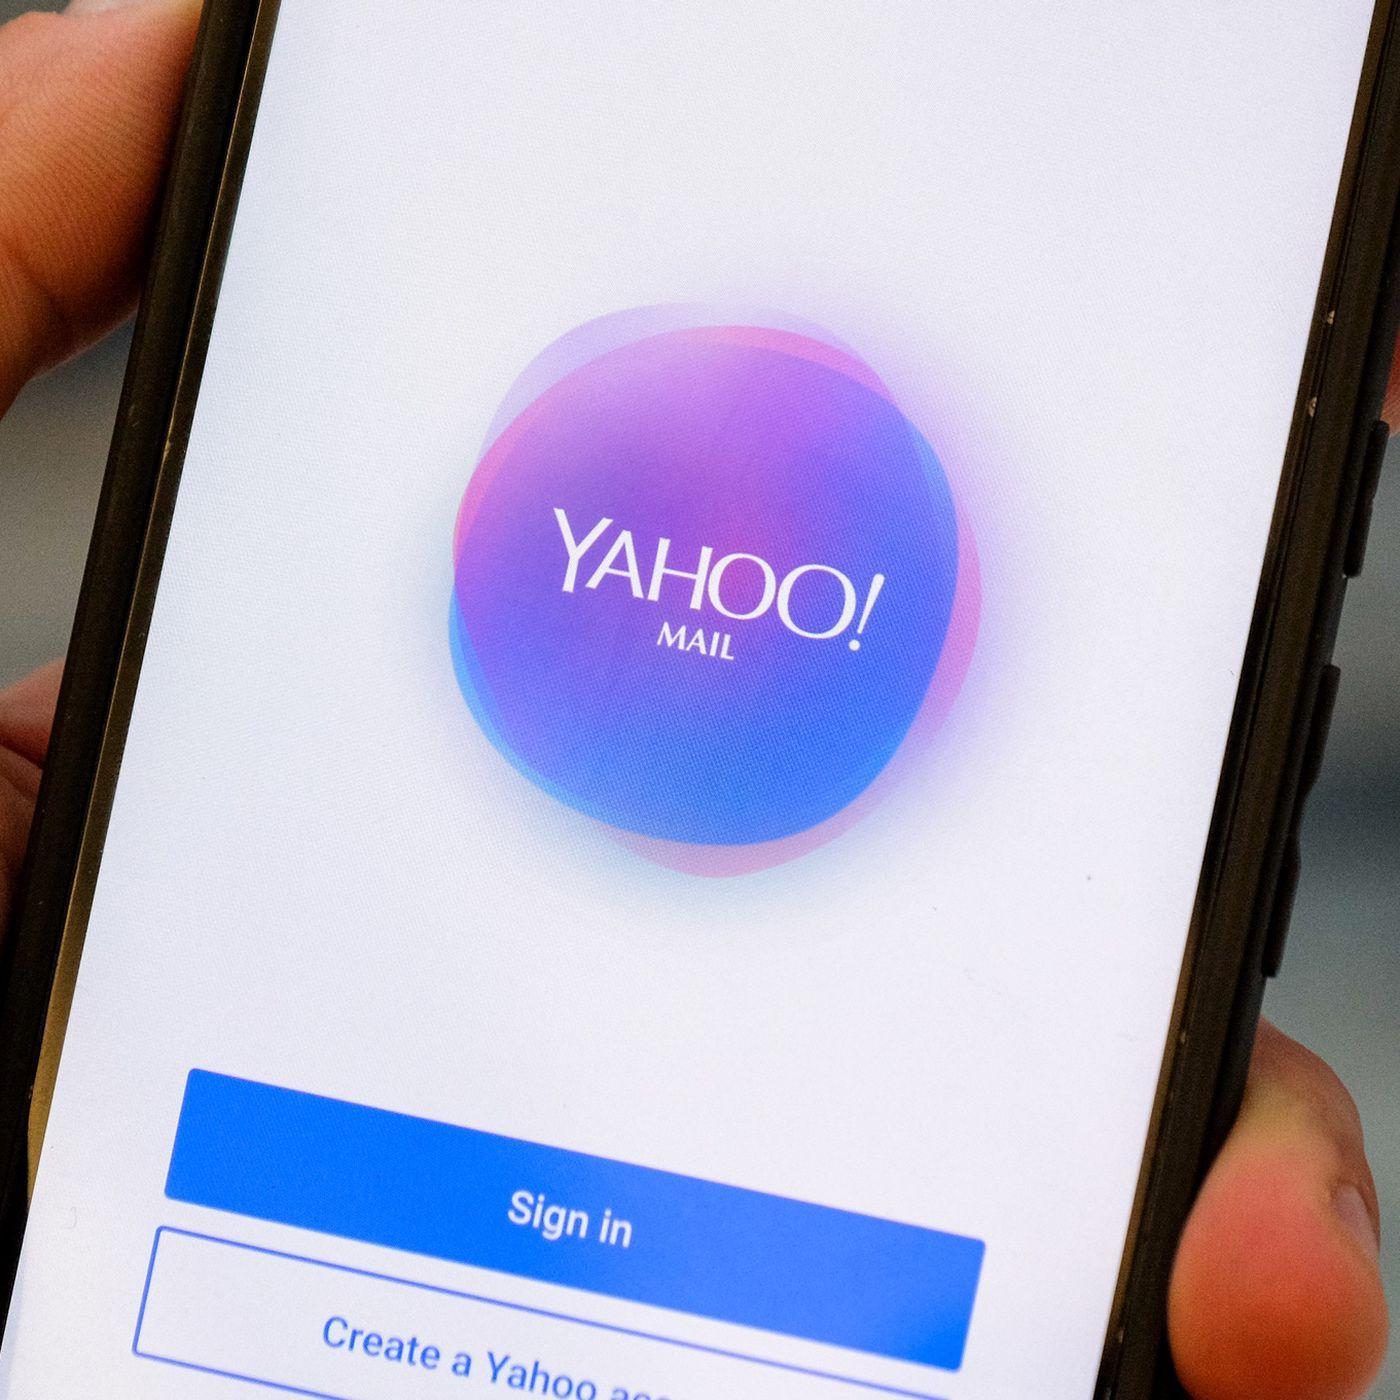 AOL Mail Logo - Oath's new privacy policy allows it to scan your Yahoo and AOL mail